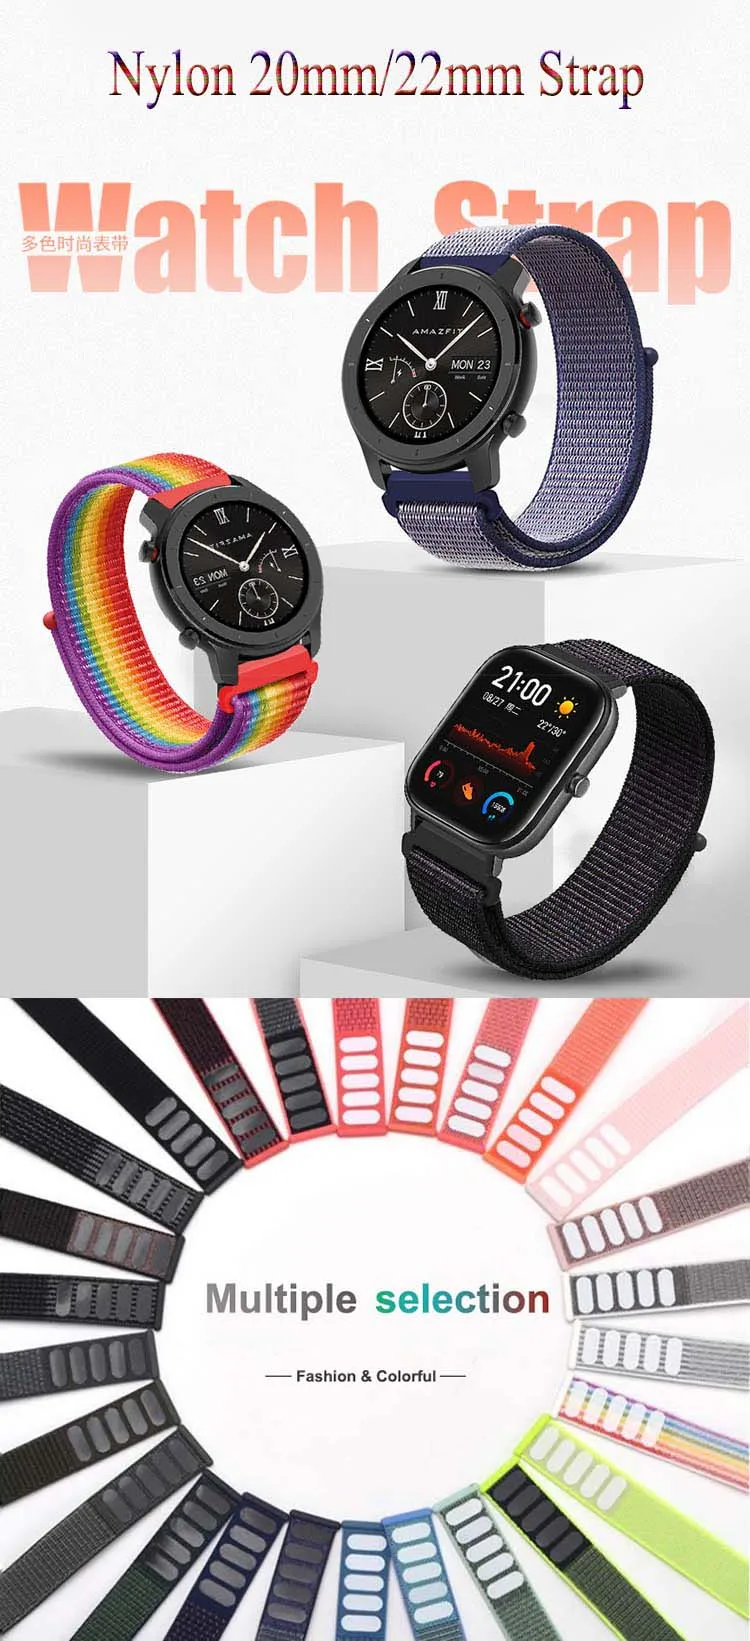 Boorui Amazfit Gts Band Nylon Colorful Strap For Amazfit Gtr 47mm Replacement For Xiaomi Huami Amazfit Bip Lite Bands mm 22mm Buy For Amazfit Band Strap For Amazfit Gtr 47mm For Amazfit Gts